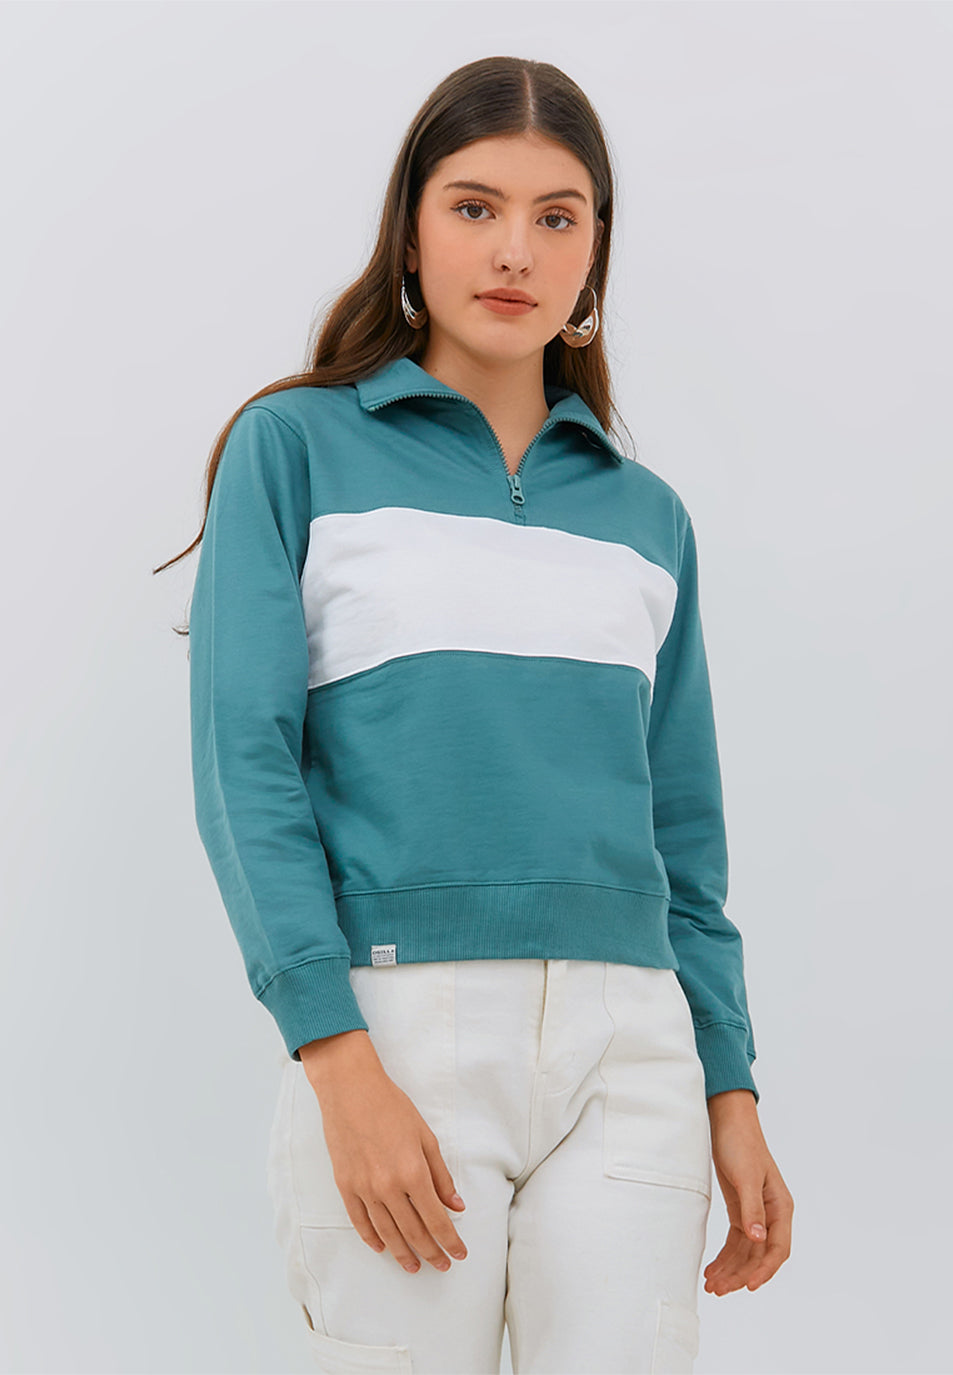 Osella Cut And Sew Half Zip Sweater In Green And White